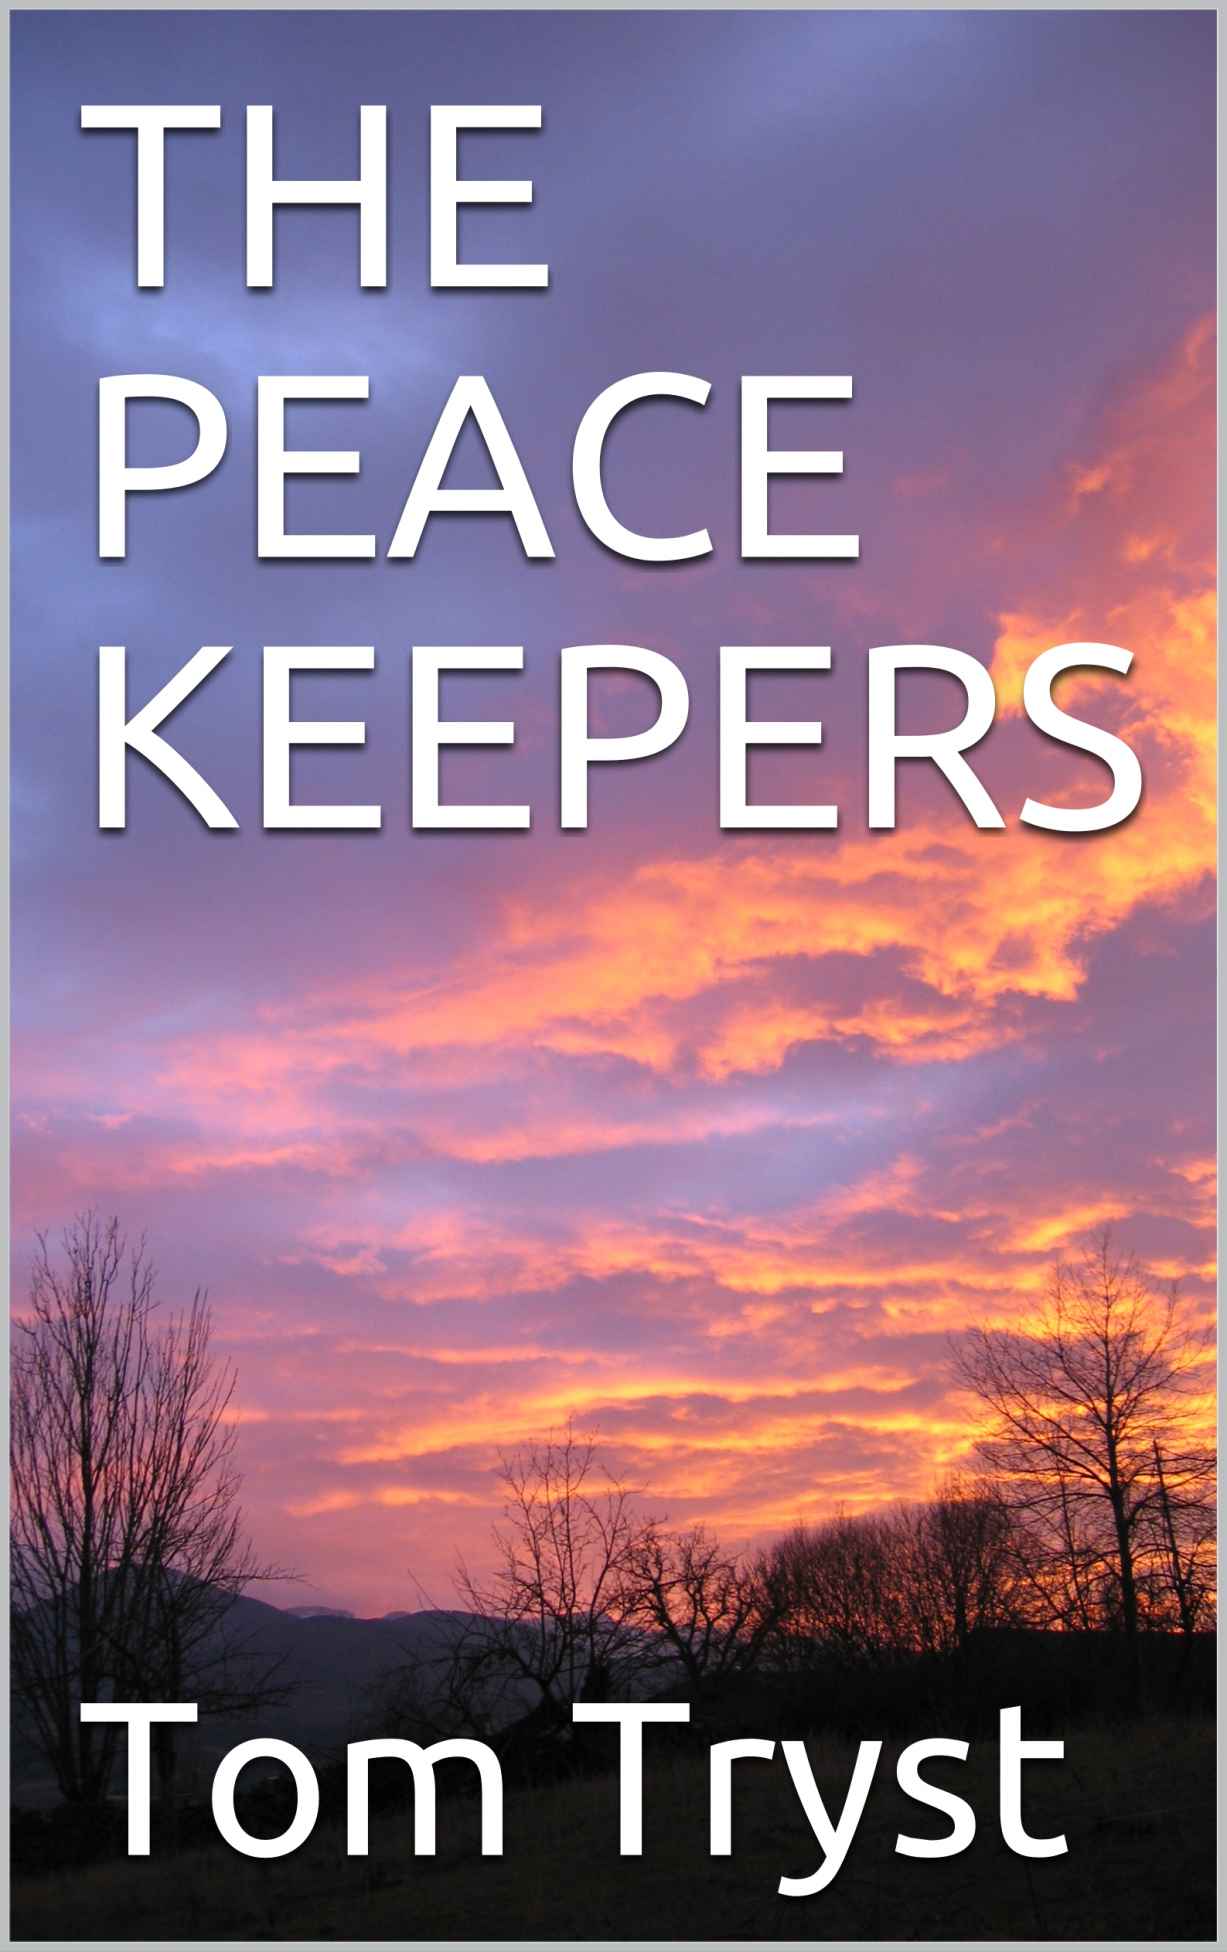 THE PEACE KEEPERS